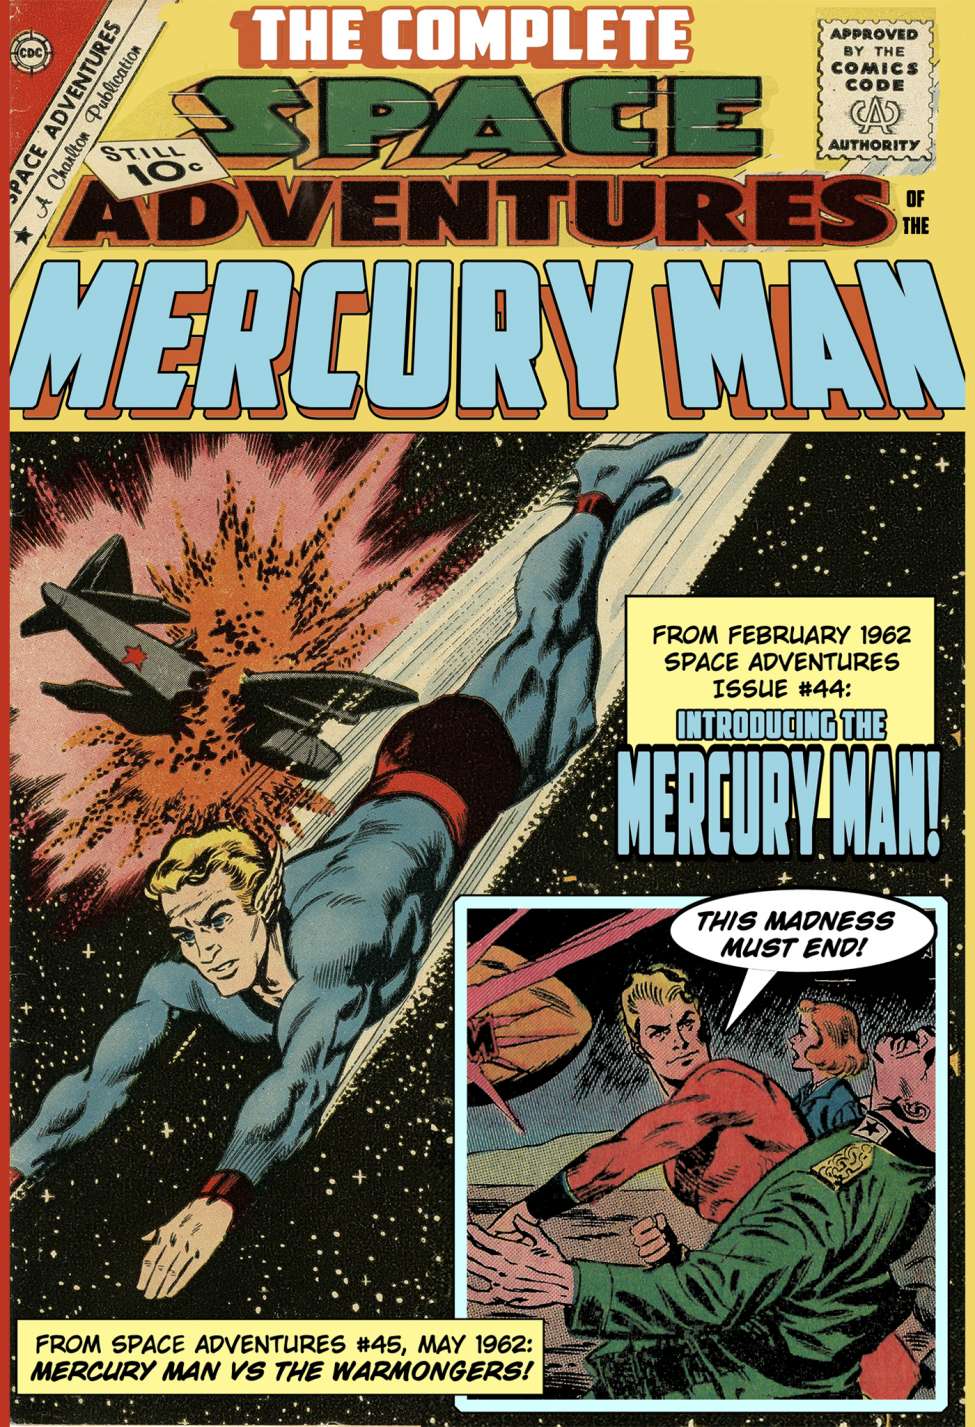 Book Cover For The Complete Space Adventures Of The Mercury Man